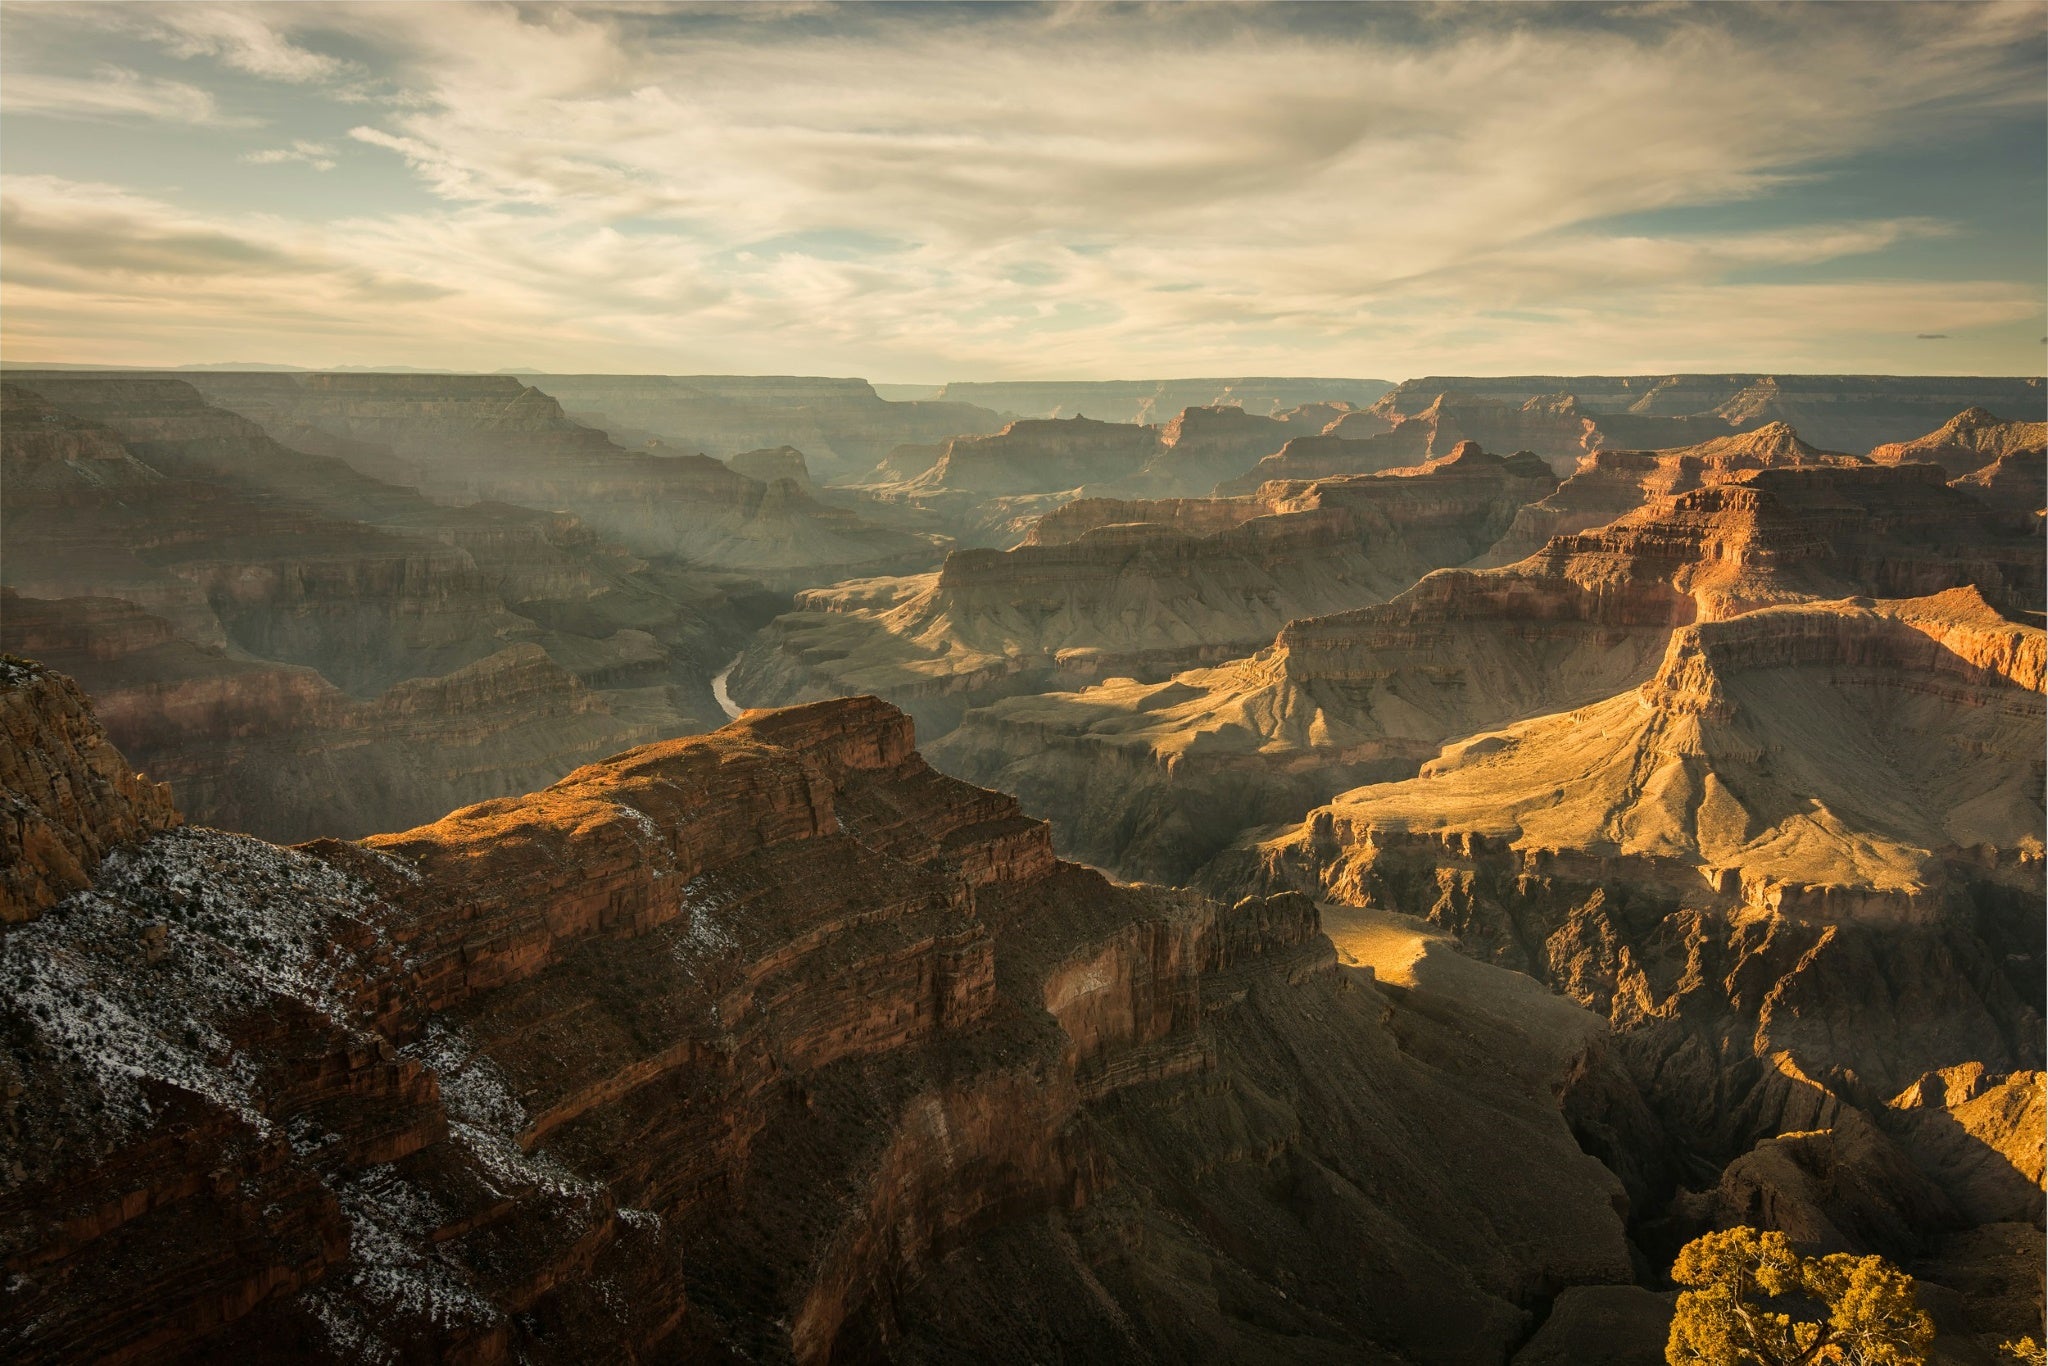 28. Grand Canyon National Park.jpg__PID:d3105172-0f54-4f9a-82aa-7abcd15f8336